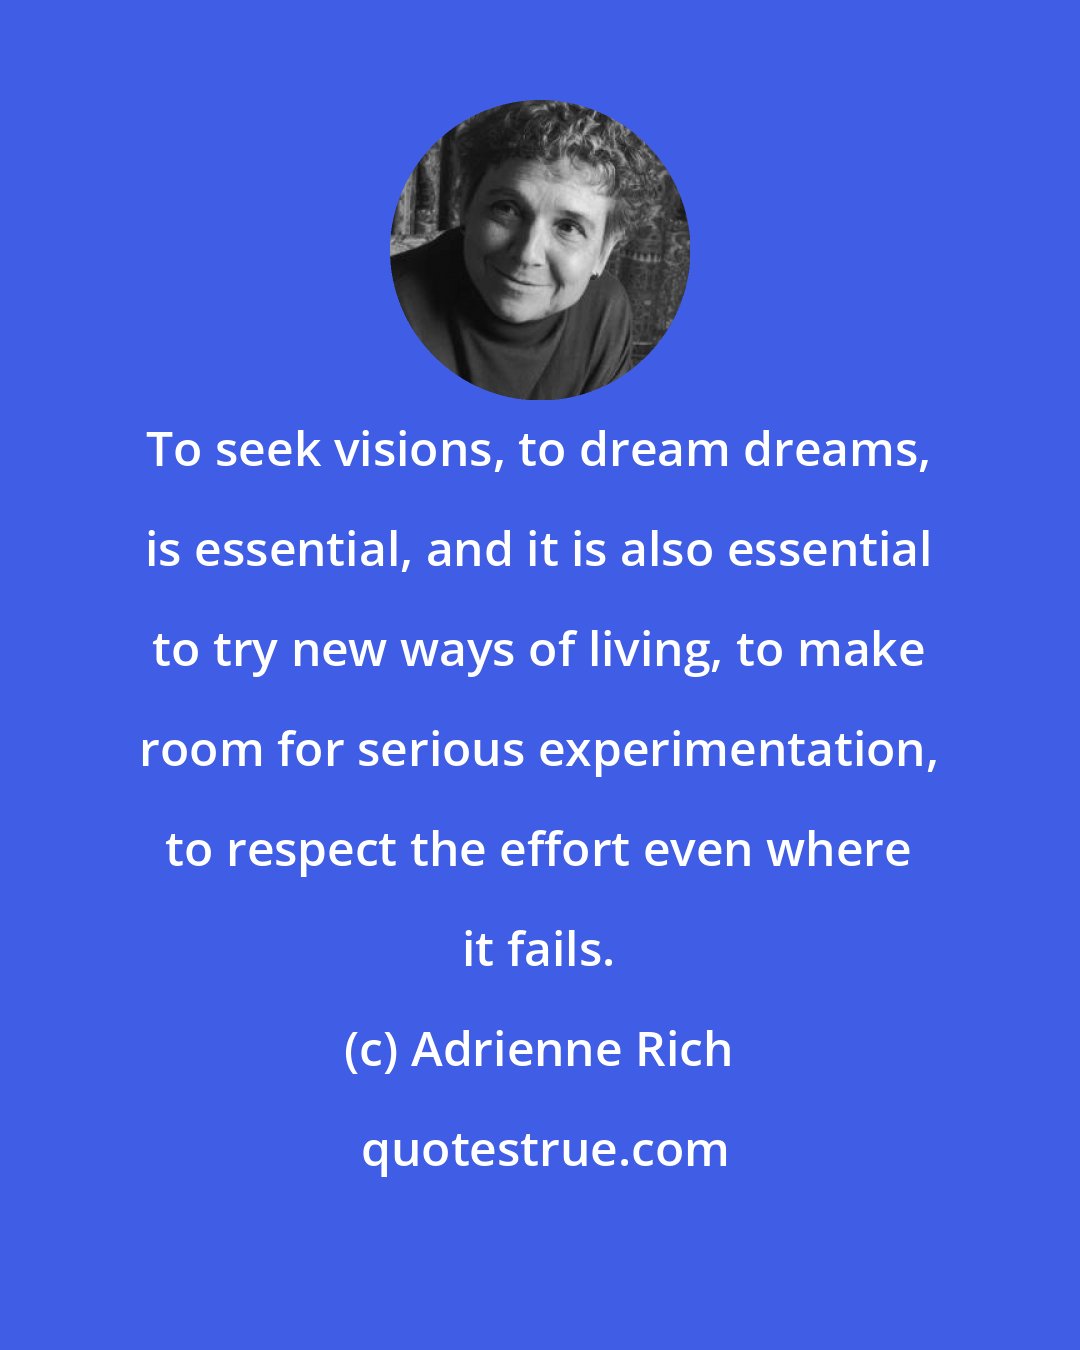 Adrienne Rich: To seek visions, to dream dreams, is essential, and it is also essential to try new ways of living, to make room for serious experimentation, to respect the effort even where it fails.